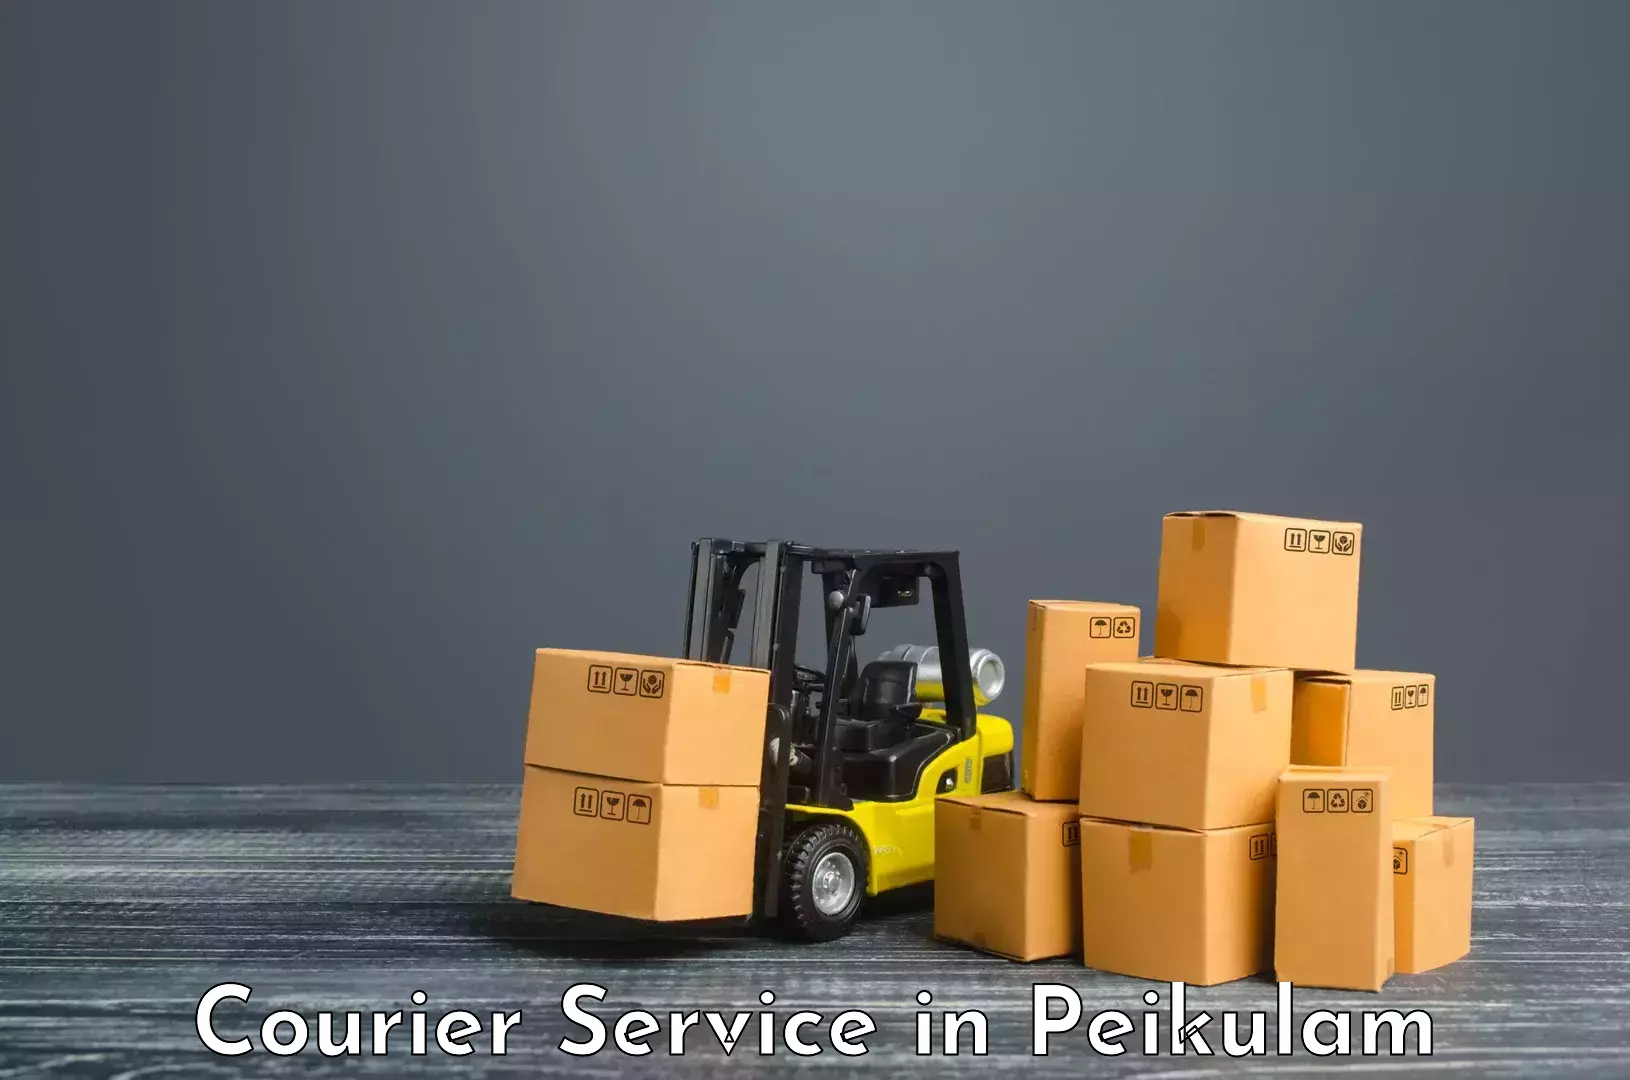 Flexible delivery scheduling in Peikulam